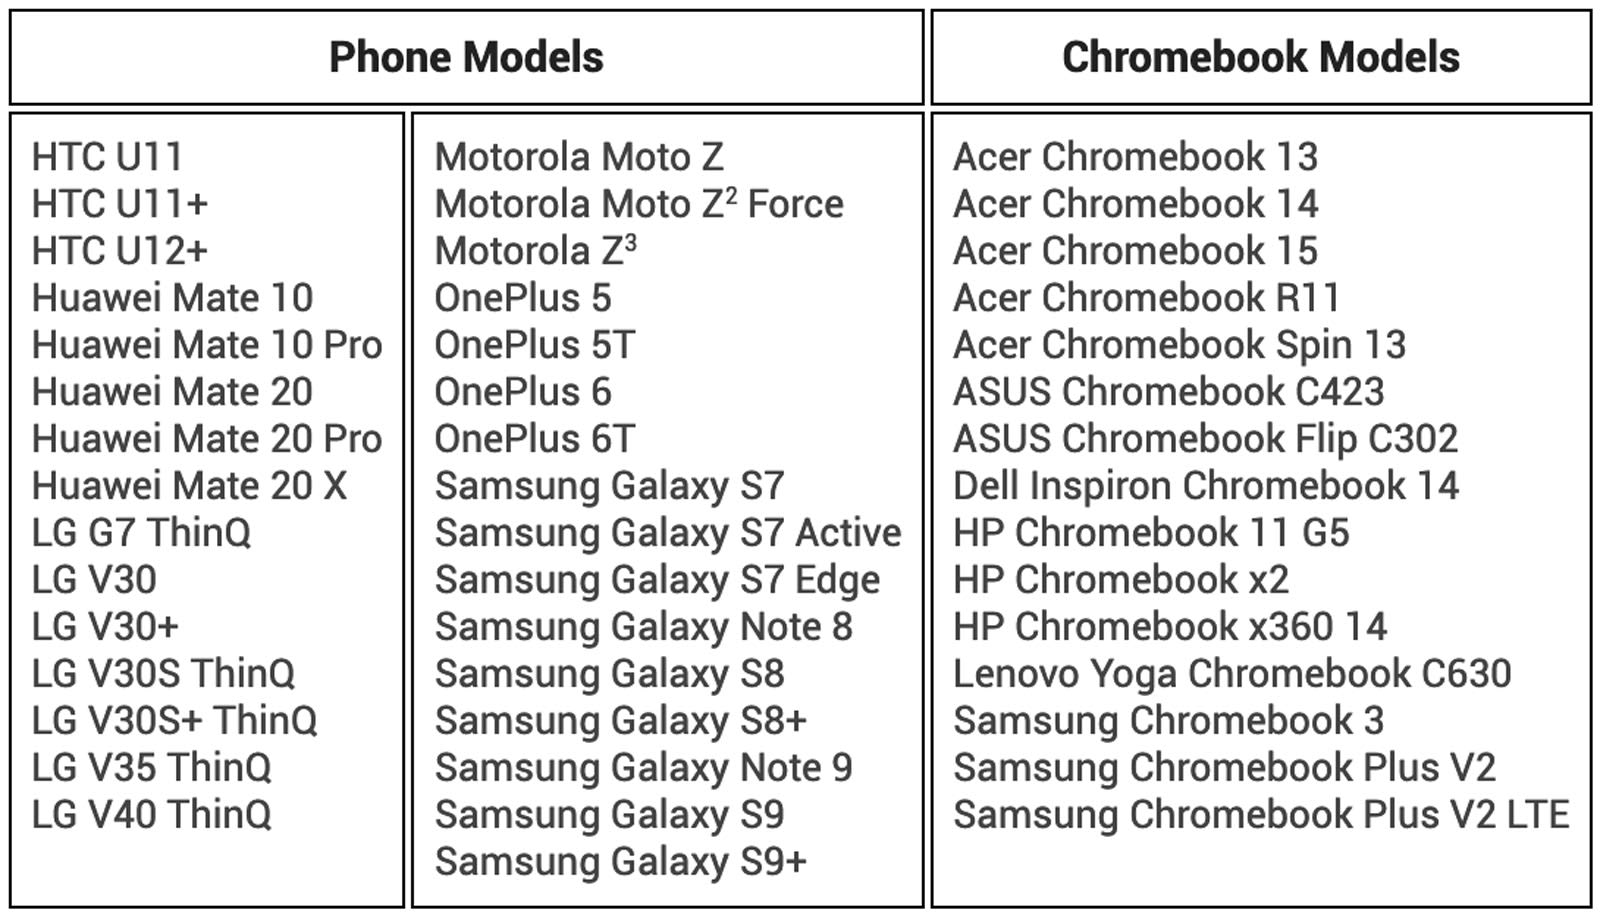 Chromebook Instant Tethering third-party device list